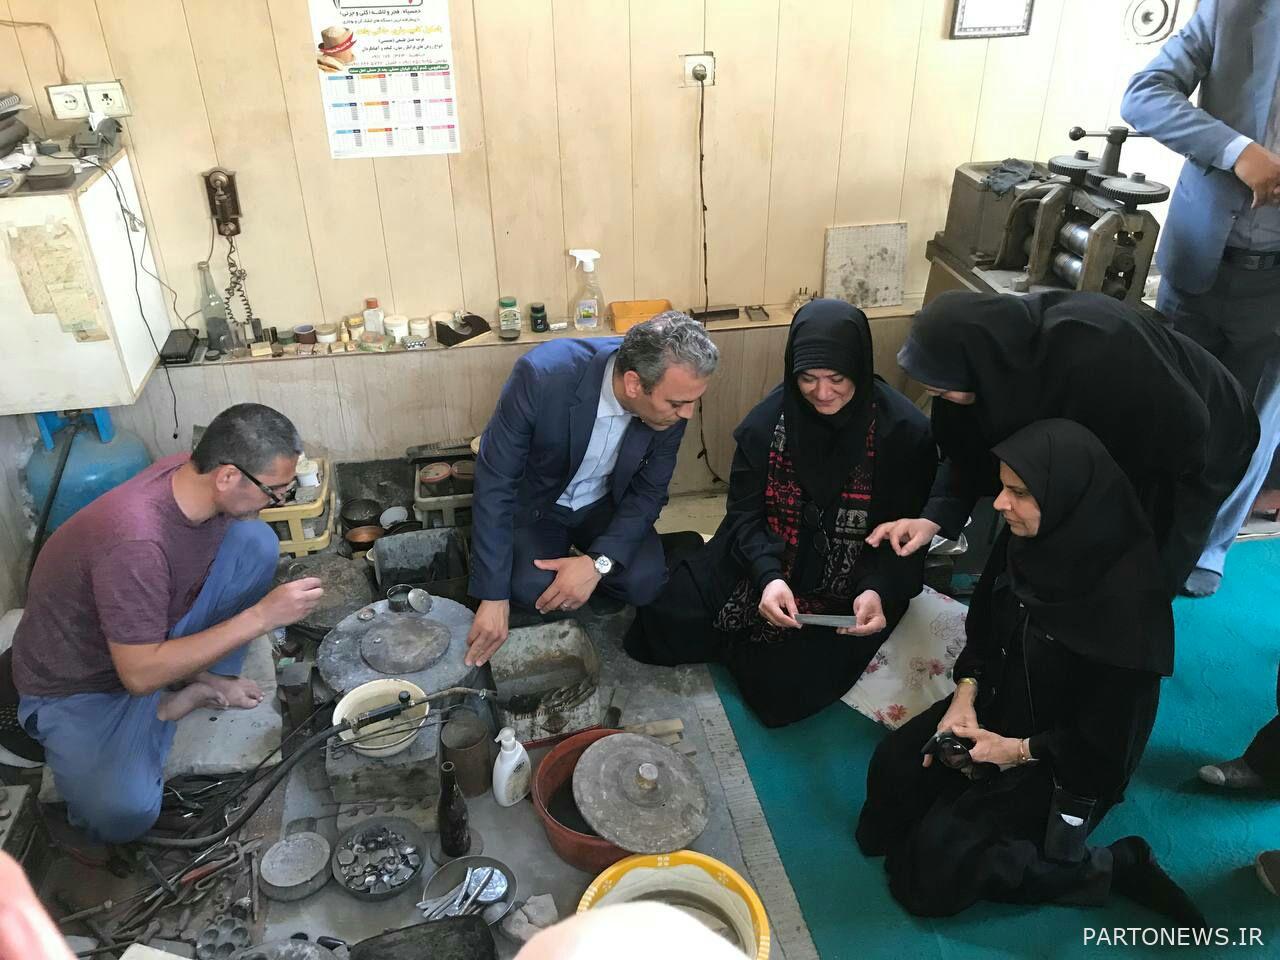 The visit of the country's handicrafts deputy to Gonbadkavus handicrafts capacities